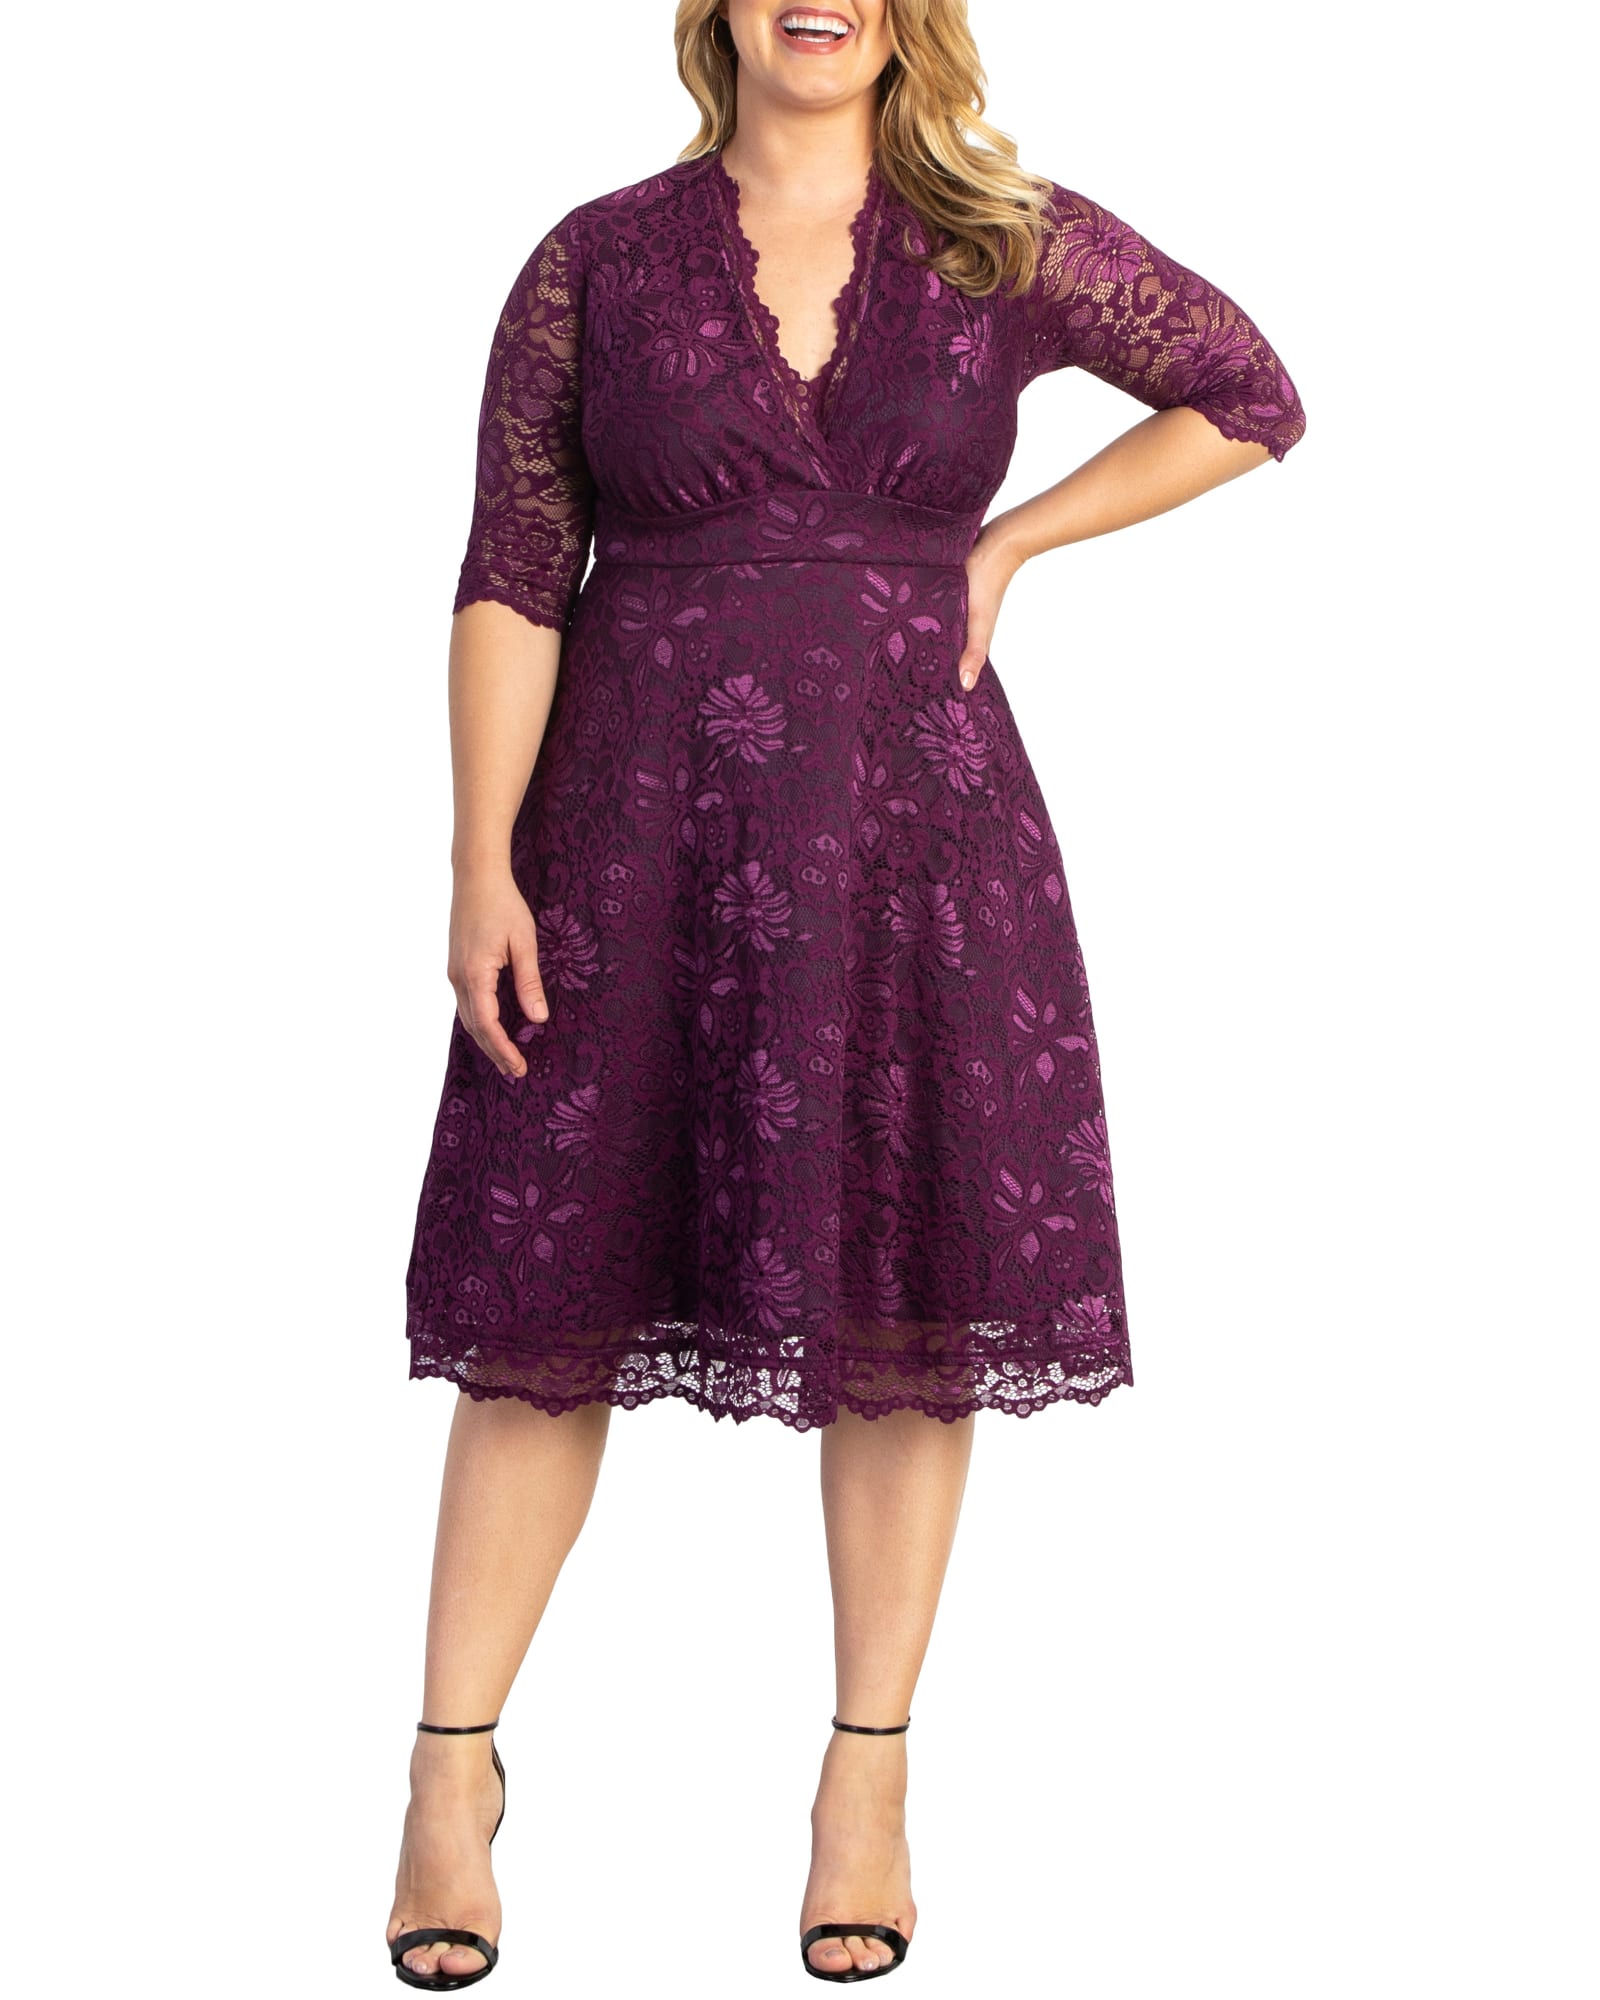 Mademoiselle Lace Cocktail Dress | BERRY BLISS